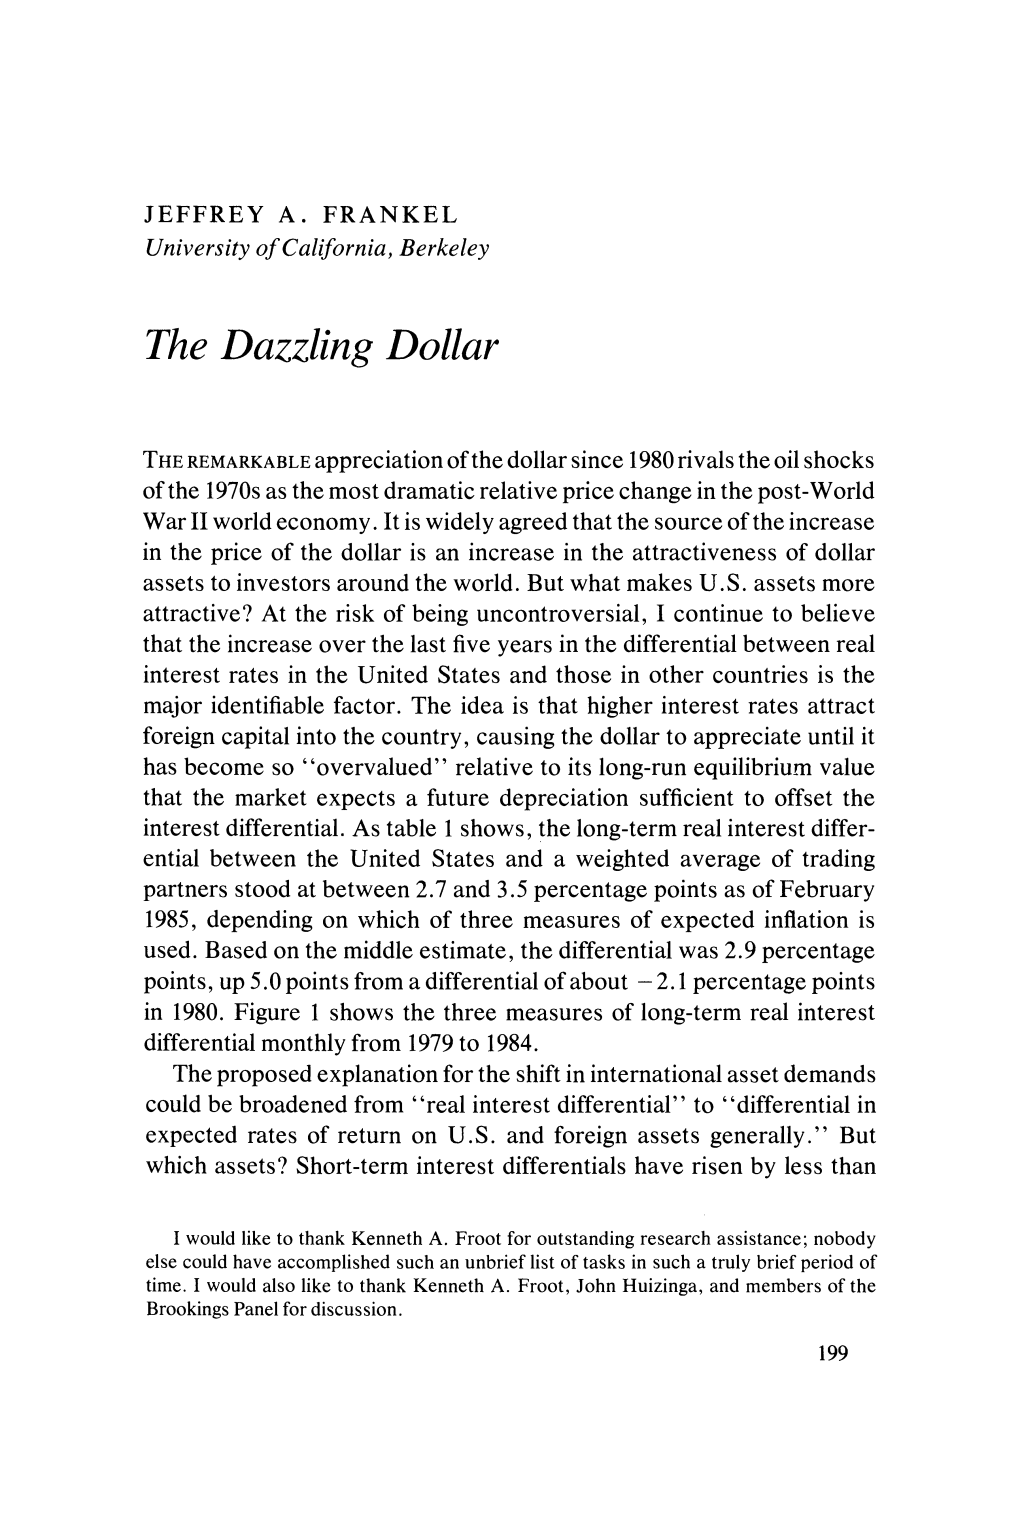 The Dazzling Dollar (Brookings Papers on Economic Activity, 1985